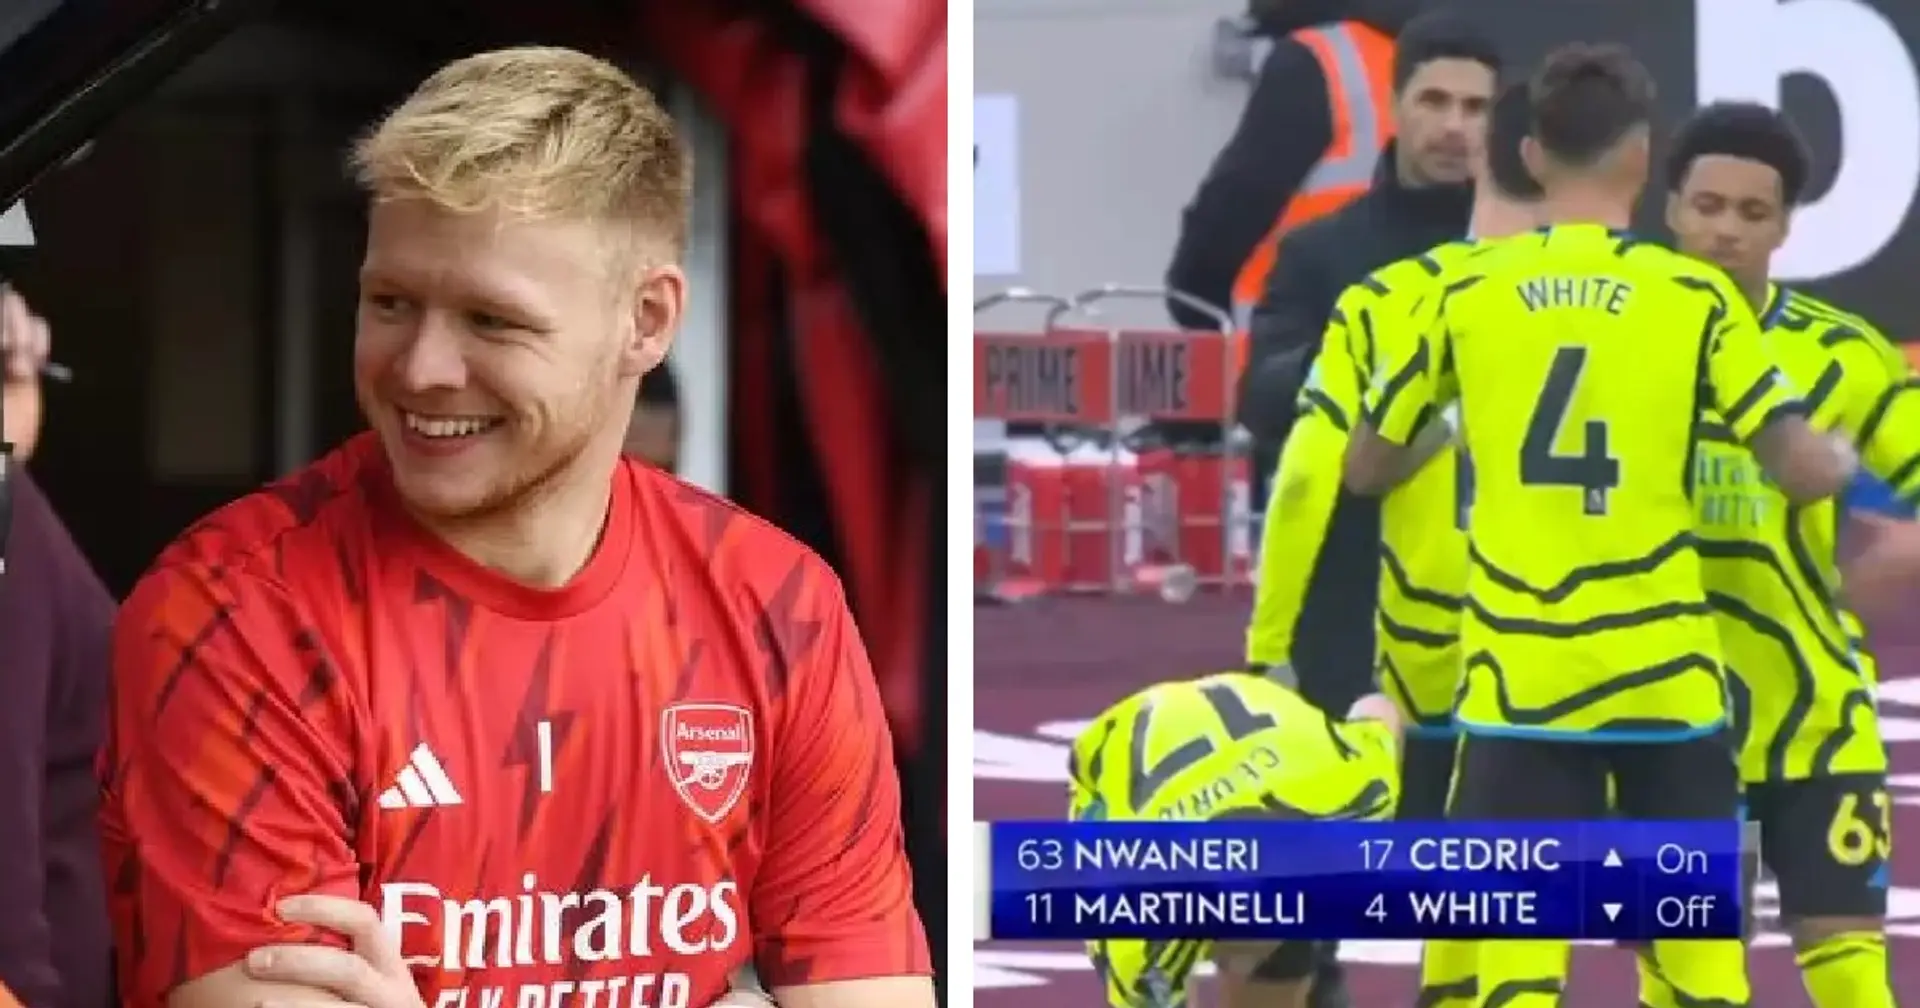 Ramsdale names Arsenal teammate who called for Nwaneri substitution